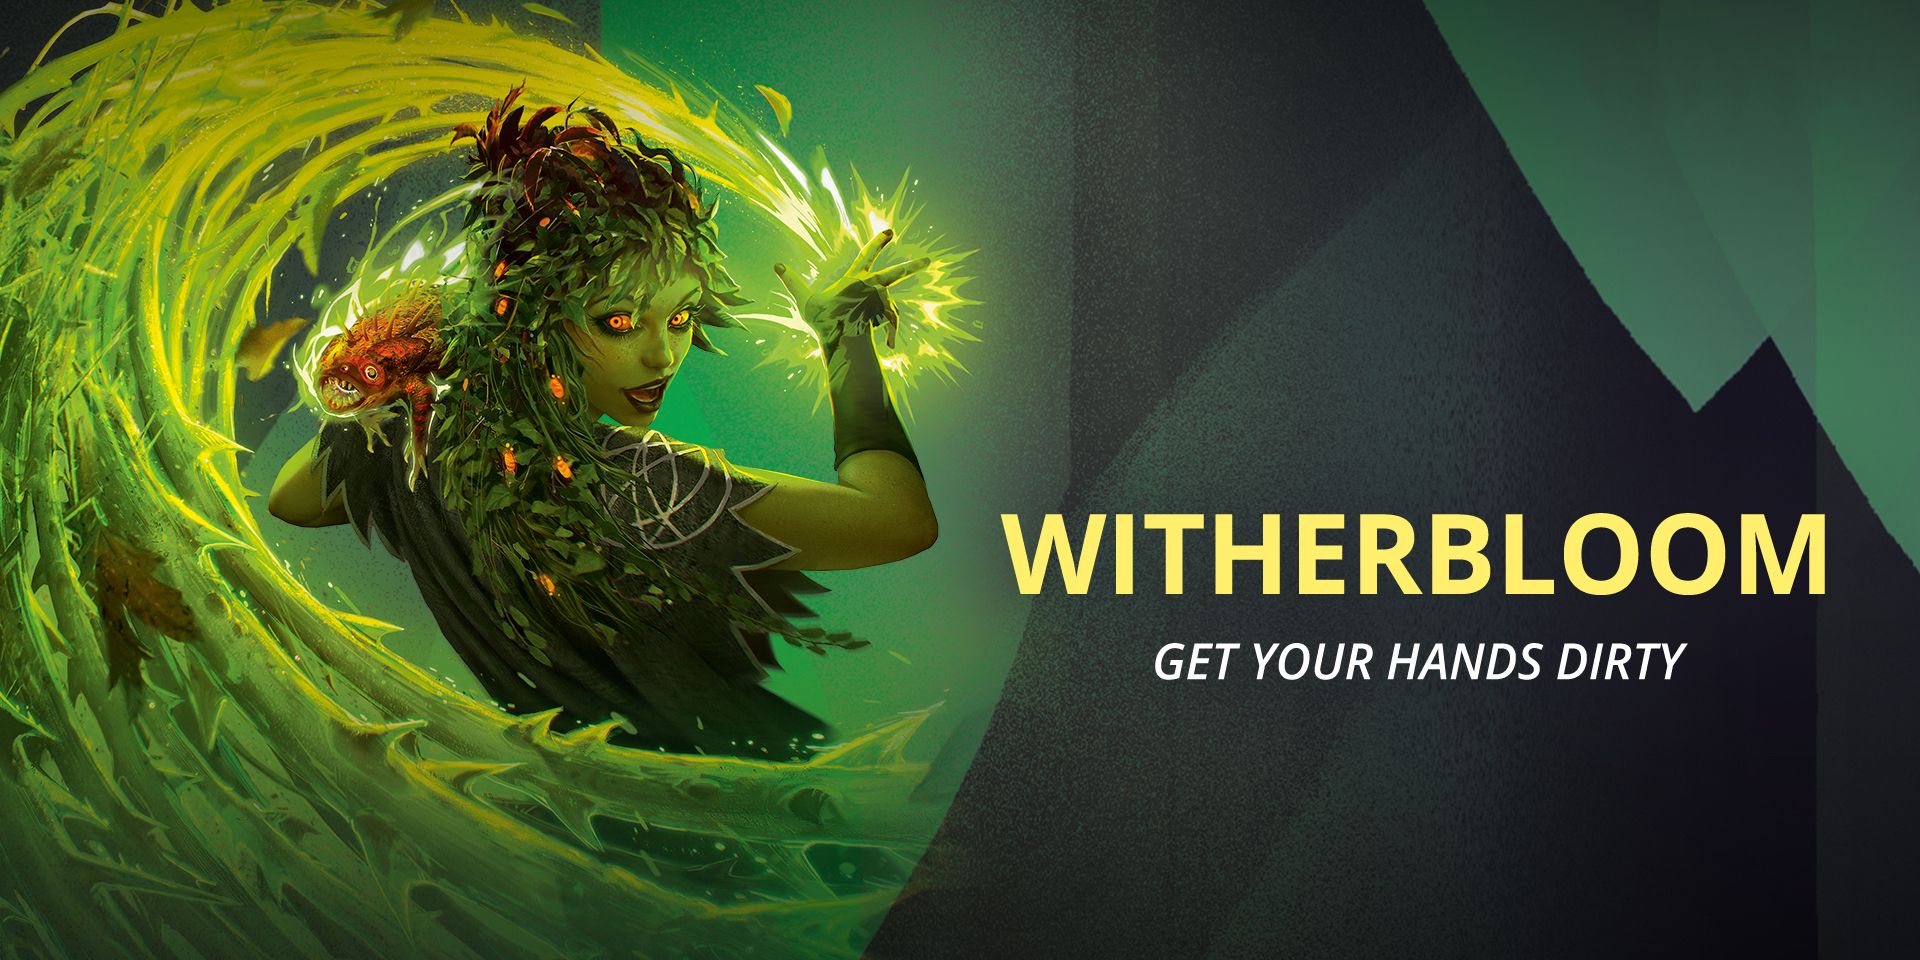 A dryad wielding a flurry of green magic, along with the text &quot;WITHERBLOOM - Get Your Hands Dirty.&quot;